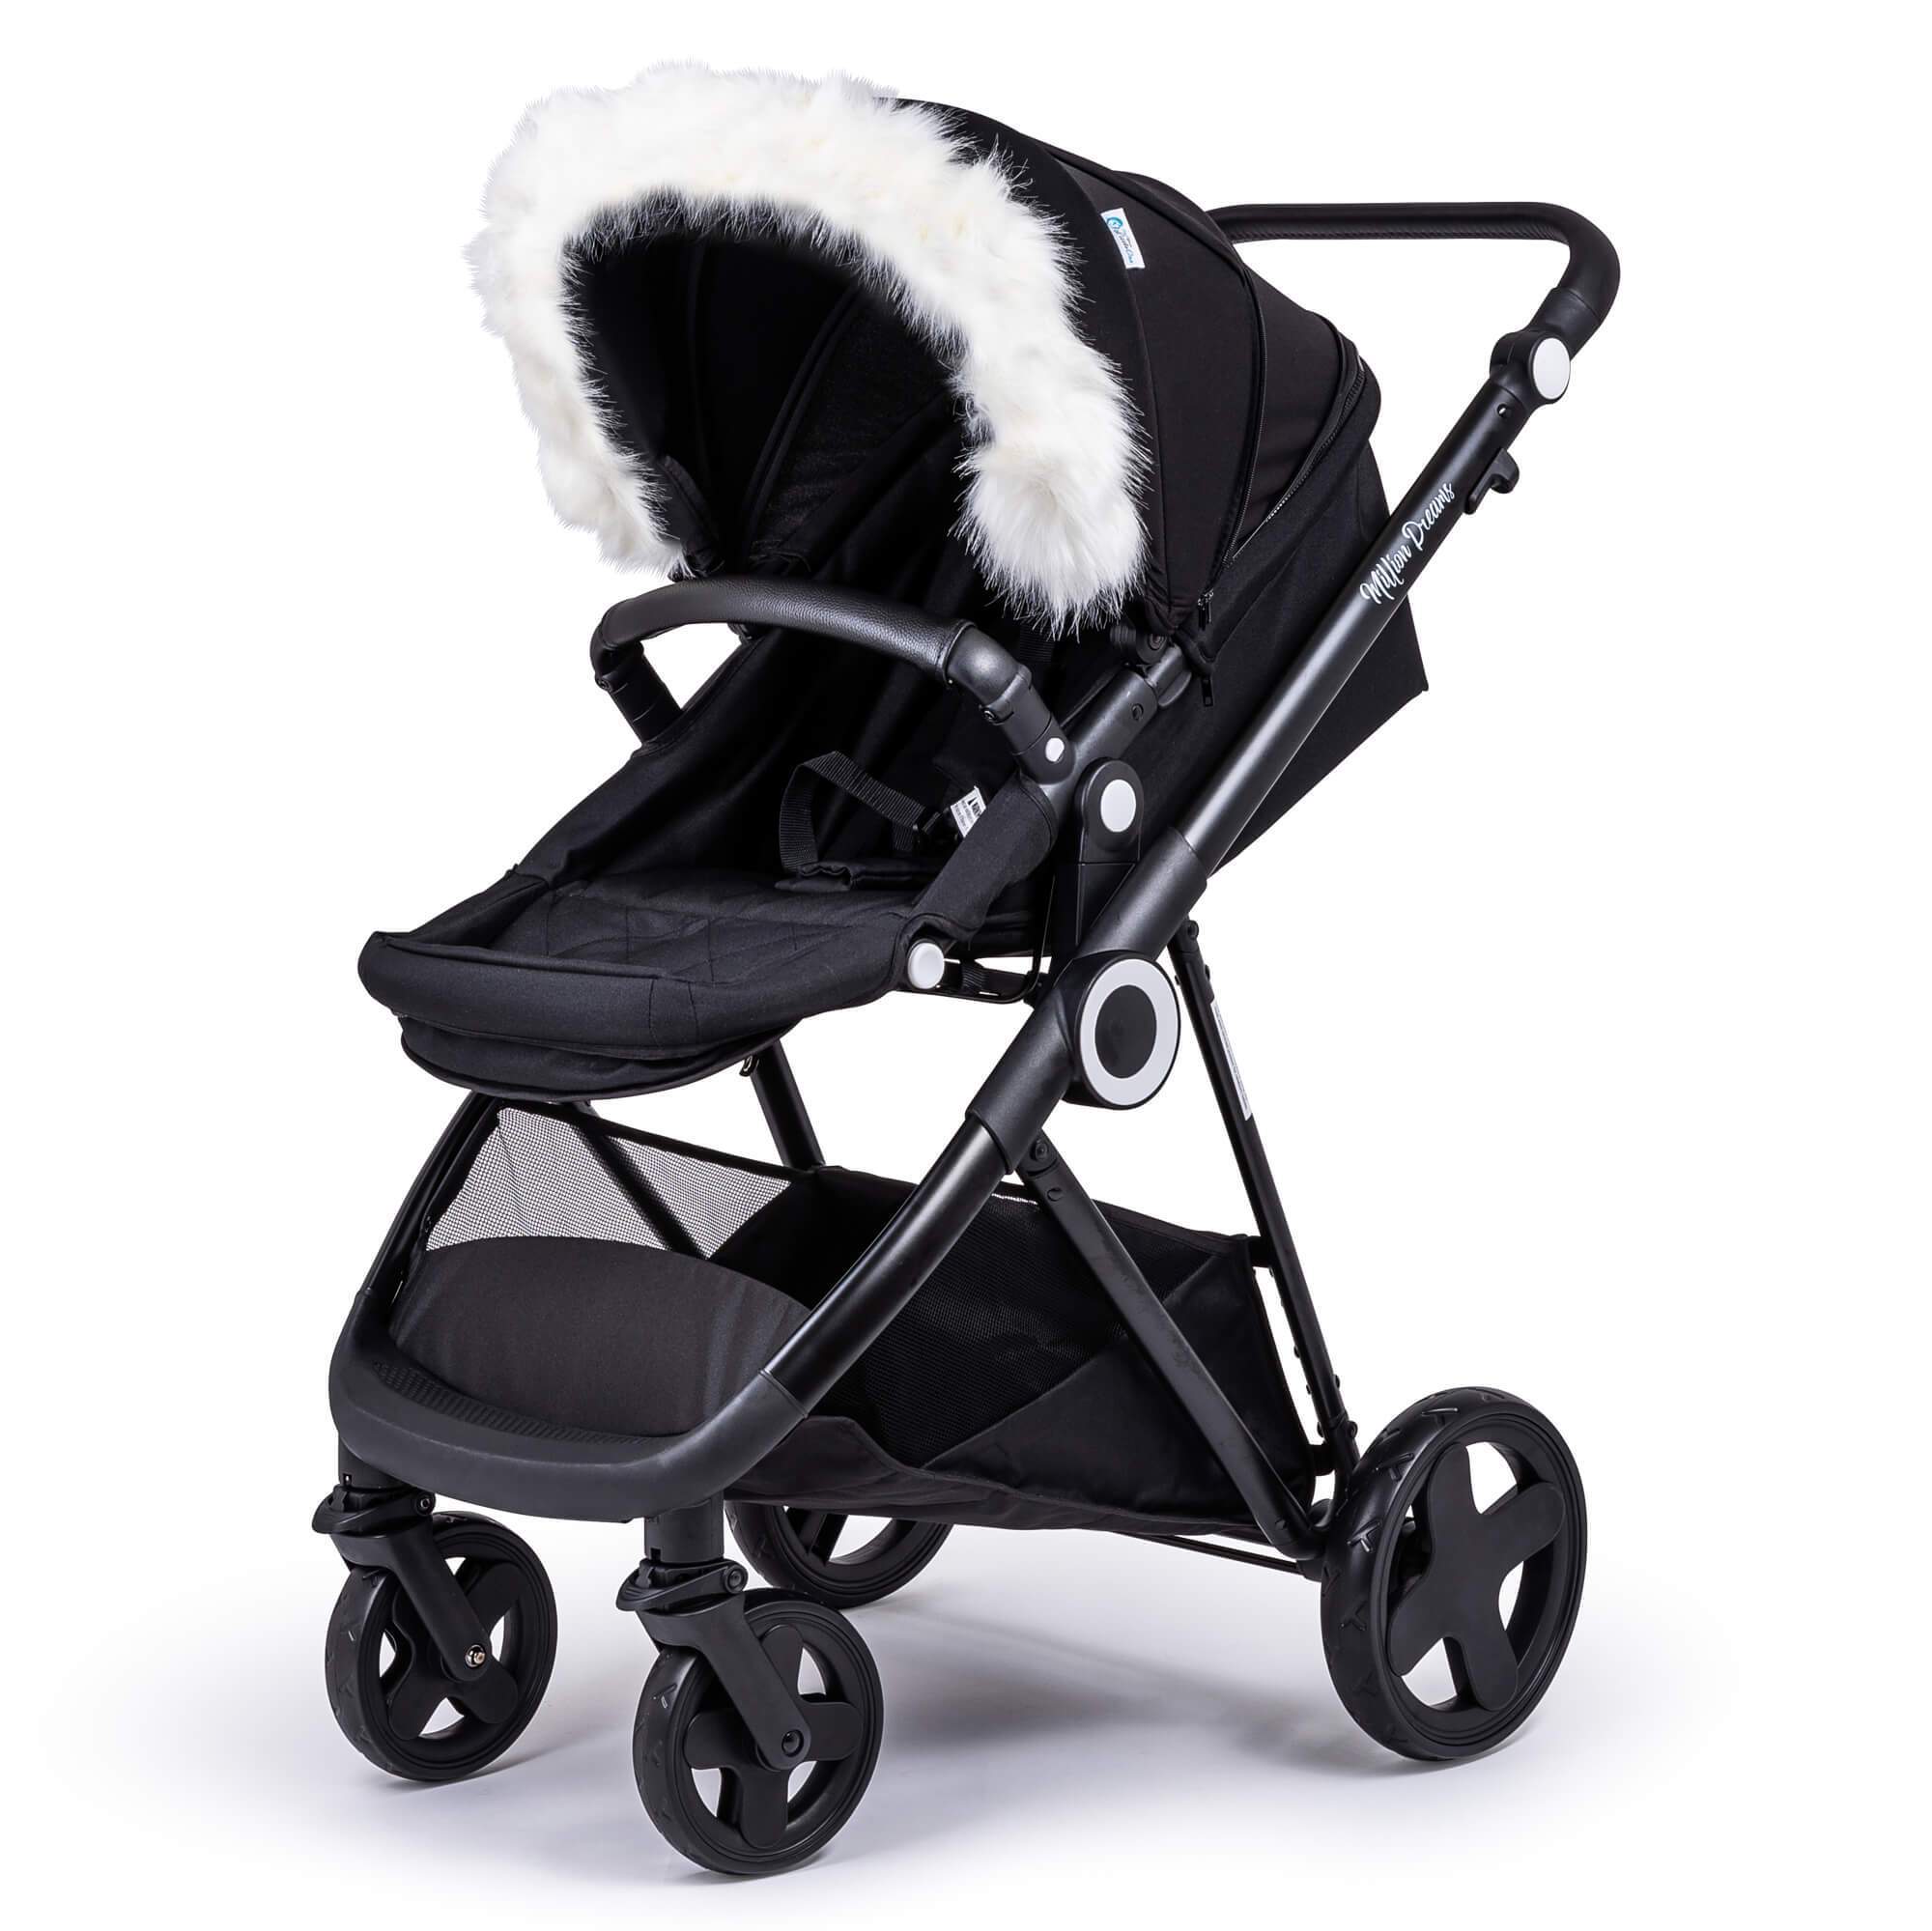 Pram Fur Hood Trim Attachment For Pushchair Compatible with Infababy - White / Fits All Models | For Your Little One